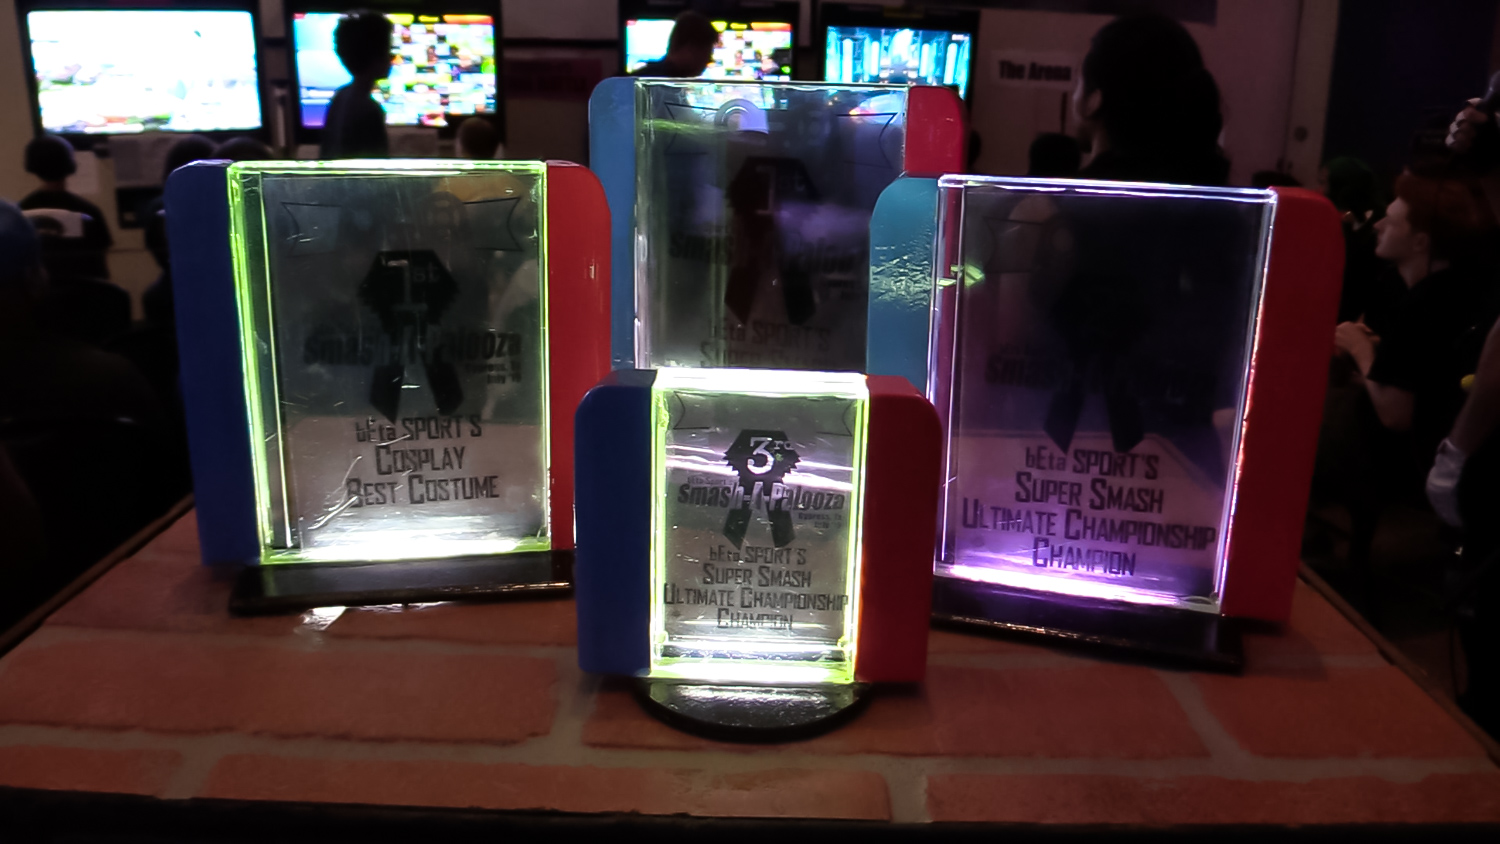 Smash-a-palooza tournament and cosplay trophies on display during the Super Smash Bros. Ultimate tournament. (Cypress News Review photo by Creighton Holub)